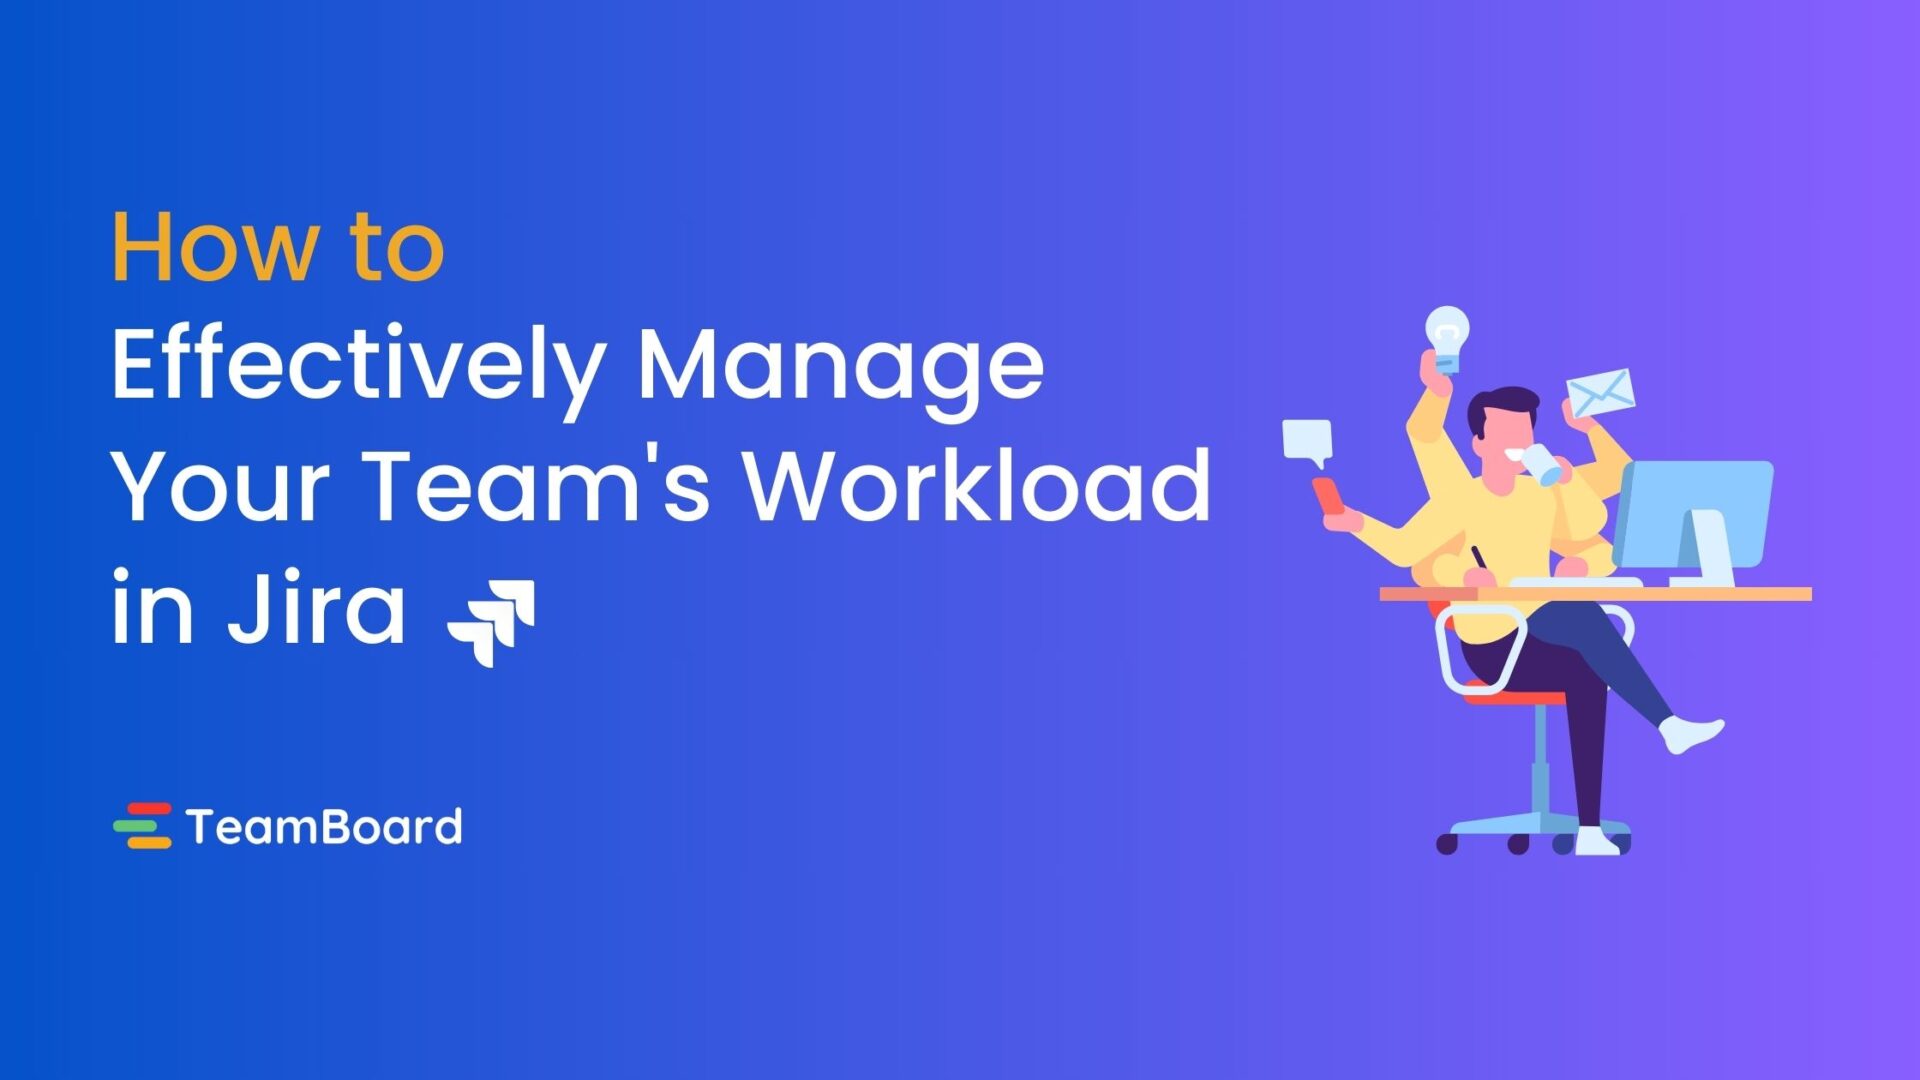 How to Effectively Manage Your Team's Workload in Jira